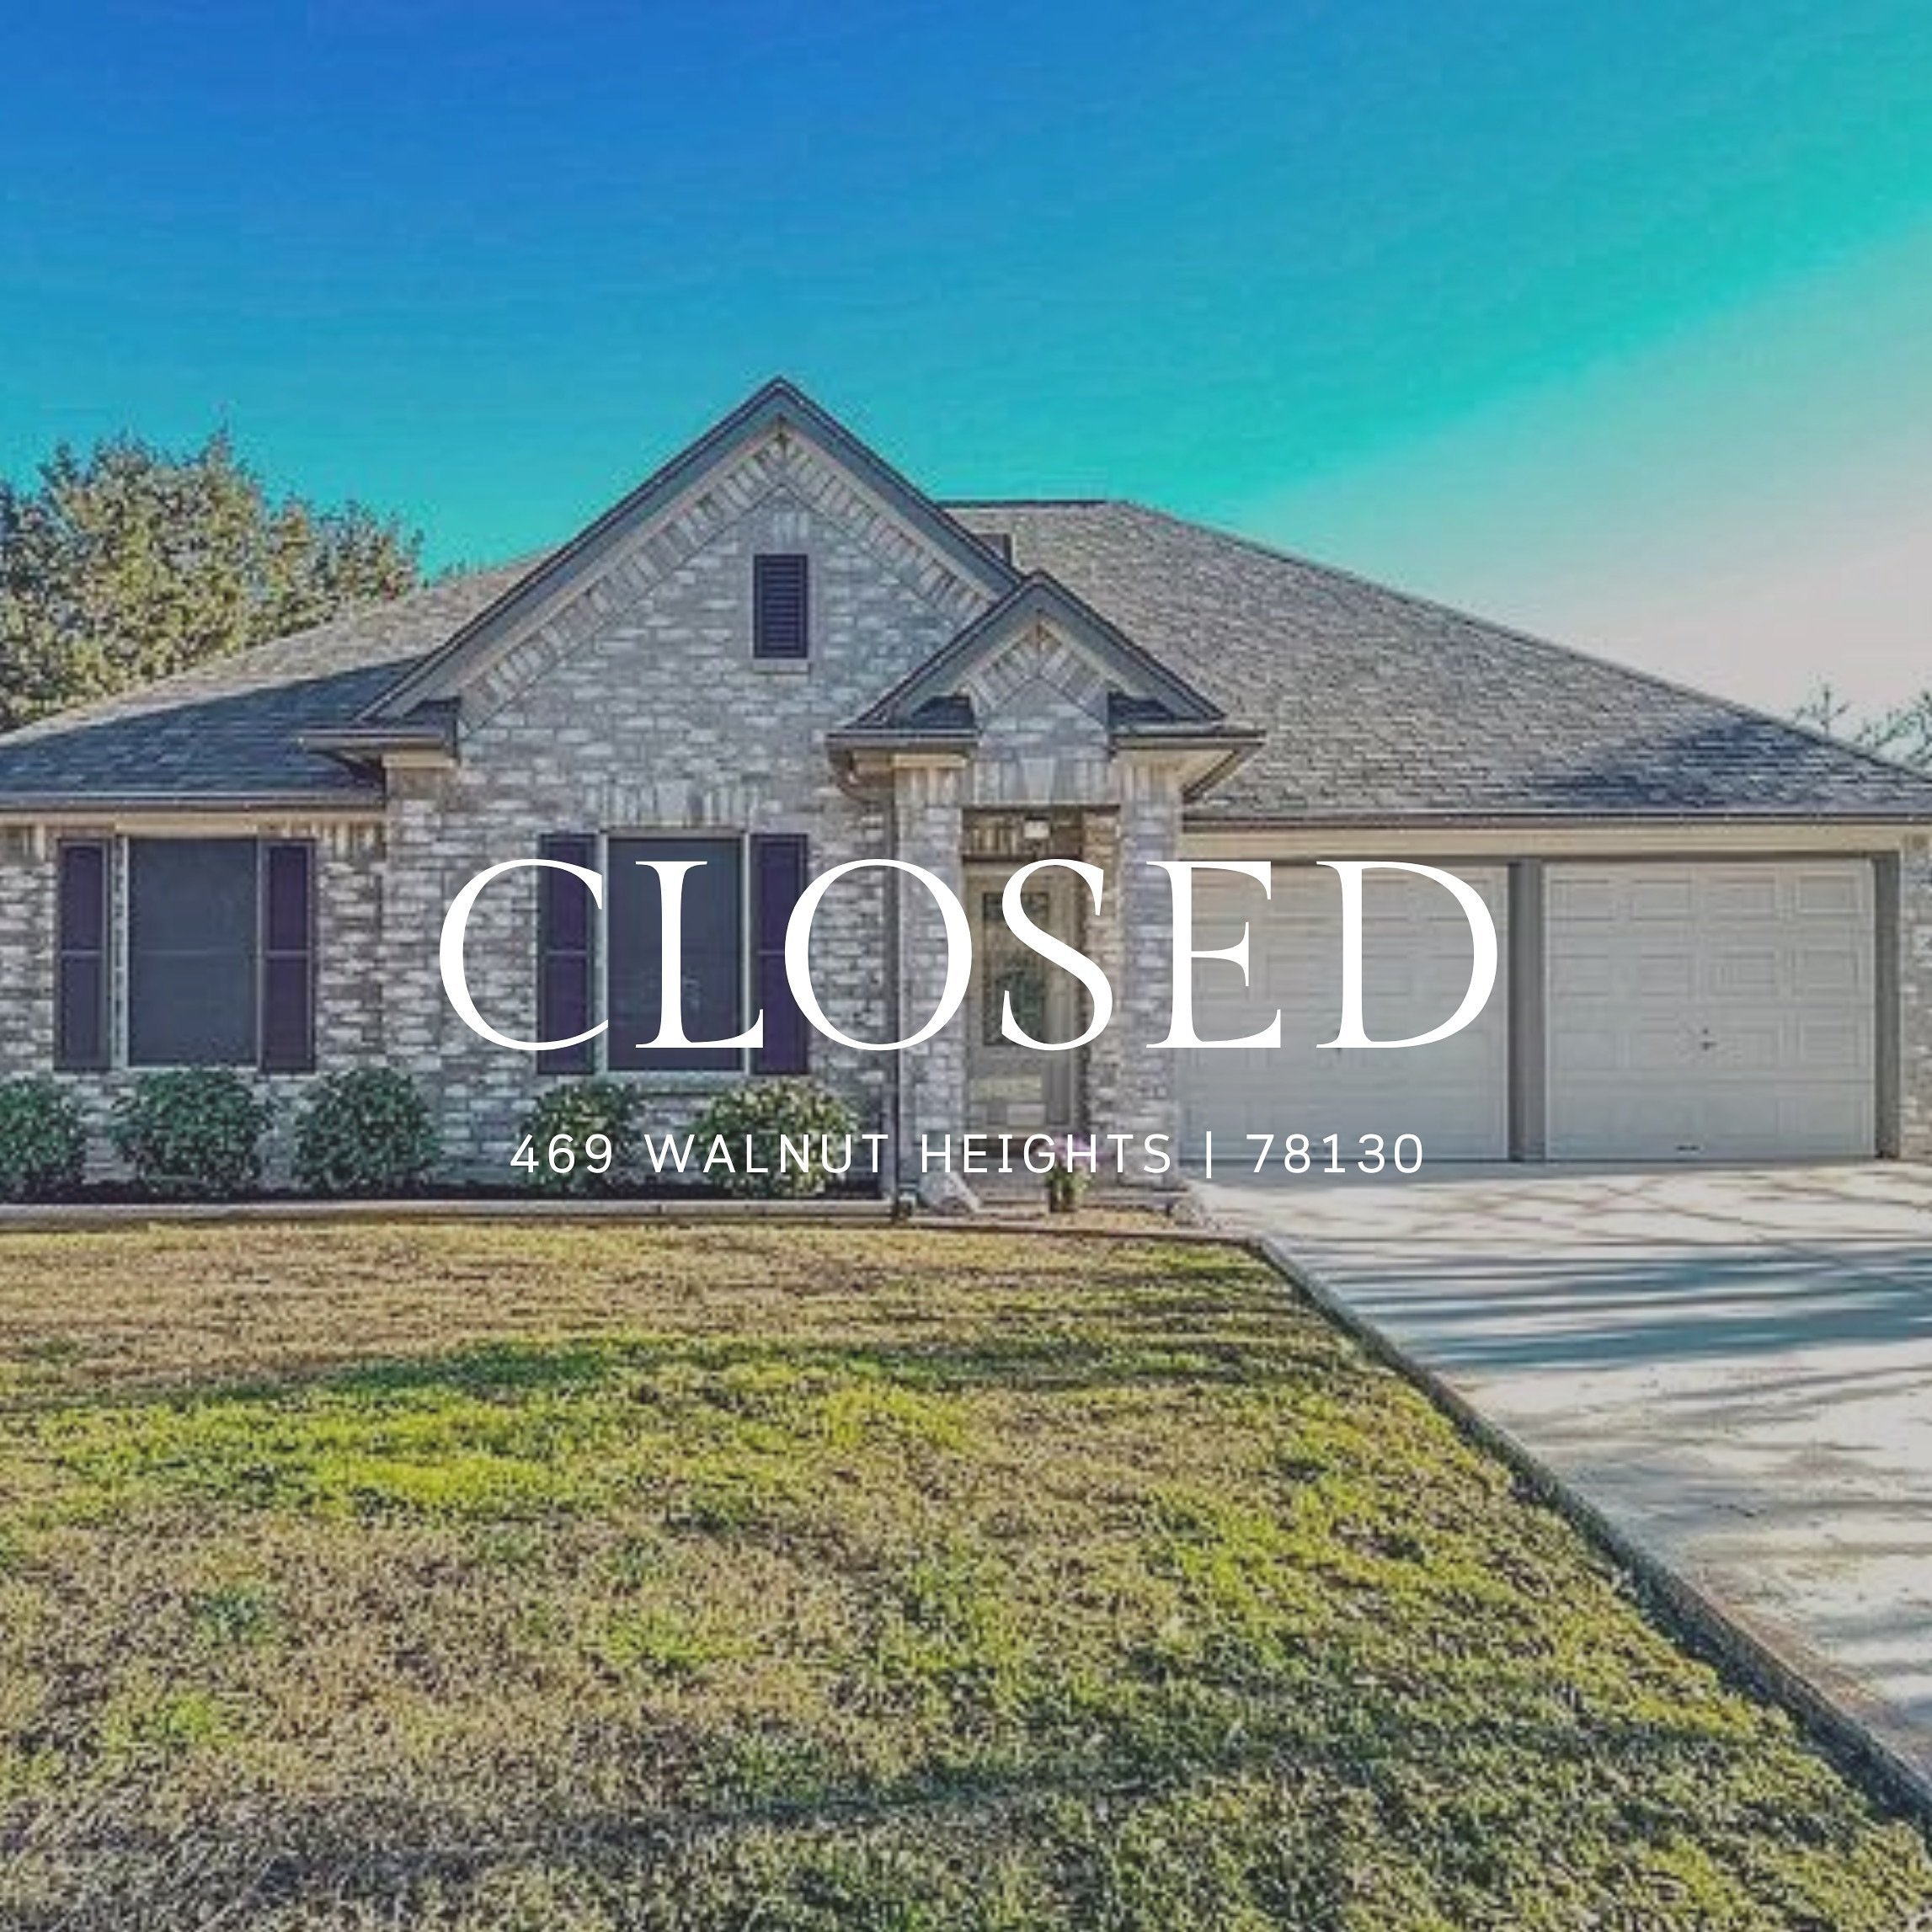 CLOSED in New Braunfels 🎉 

Prior to beginning their search, these clients of mine had never been to New Braunfels. I&rsquo;m so thankful they trusted me throughout this process and couldn&rsquo;t be happier for them in their new home! 

Morgan Cant